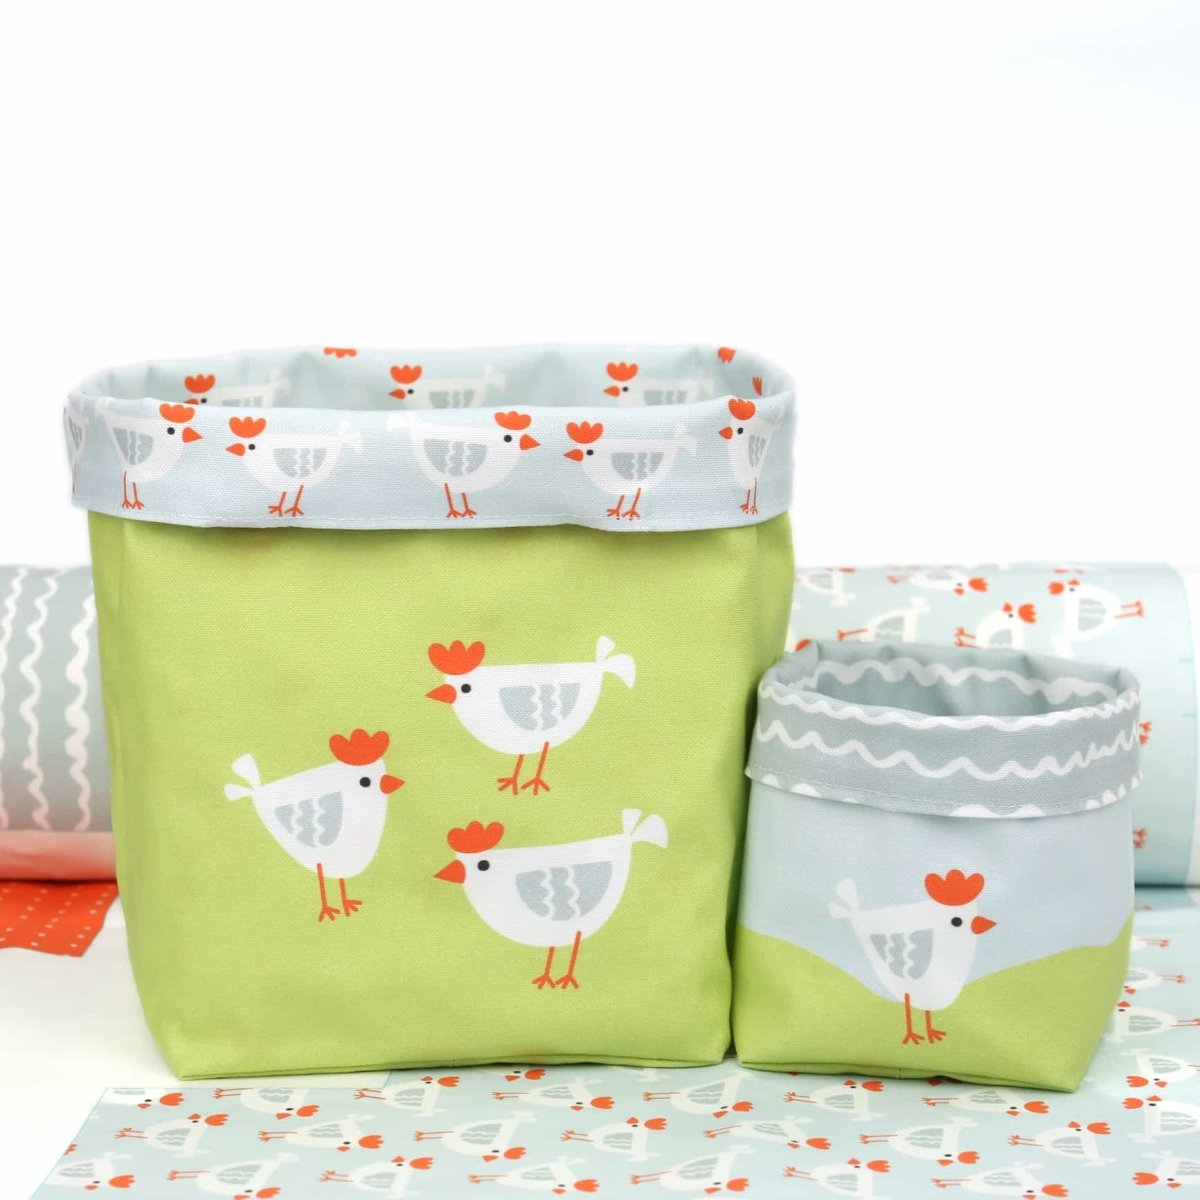 DIY Basket Set - Eggsactly Chickens - By Abby and Me - Art & Craft Kits - Bibs And Boots Fabric